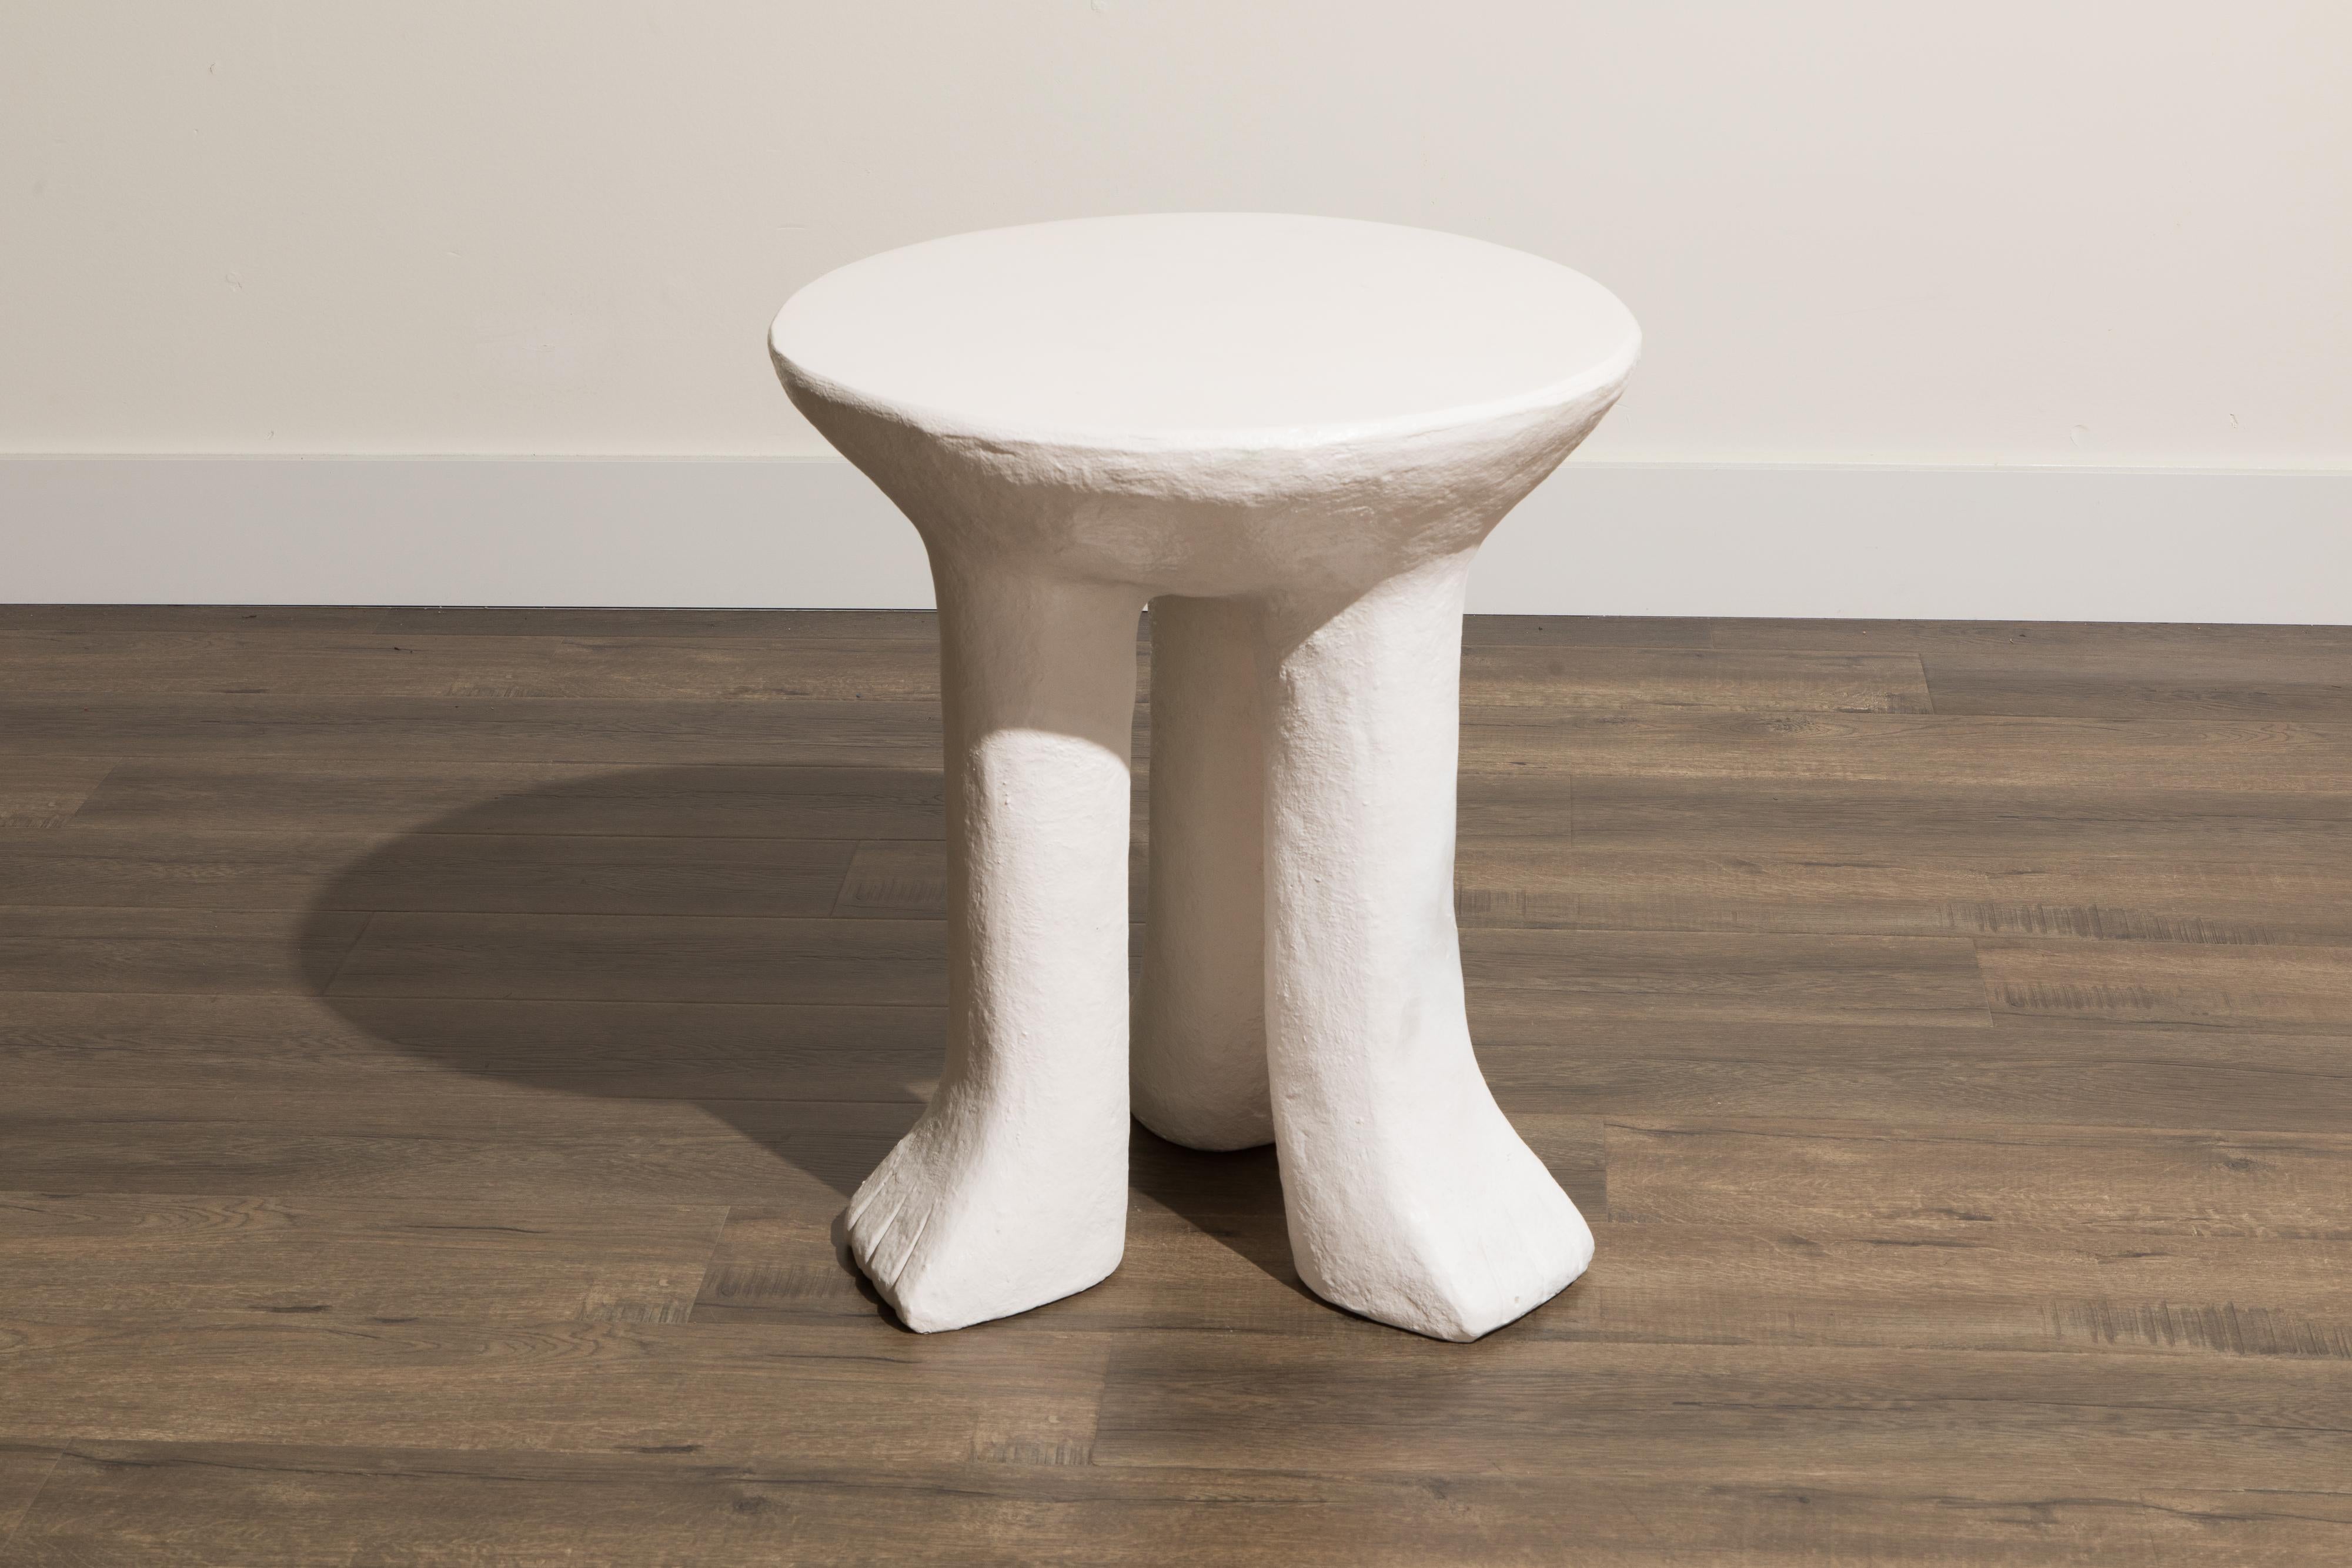 20th Century Vintage Three-Legged Side Table in the Style of John Dickinson in White Plaster